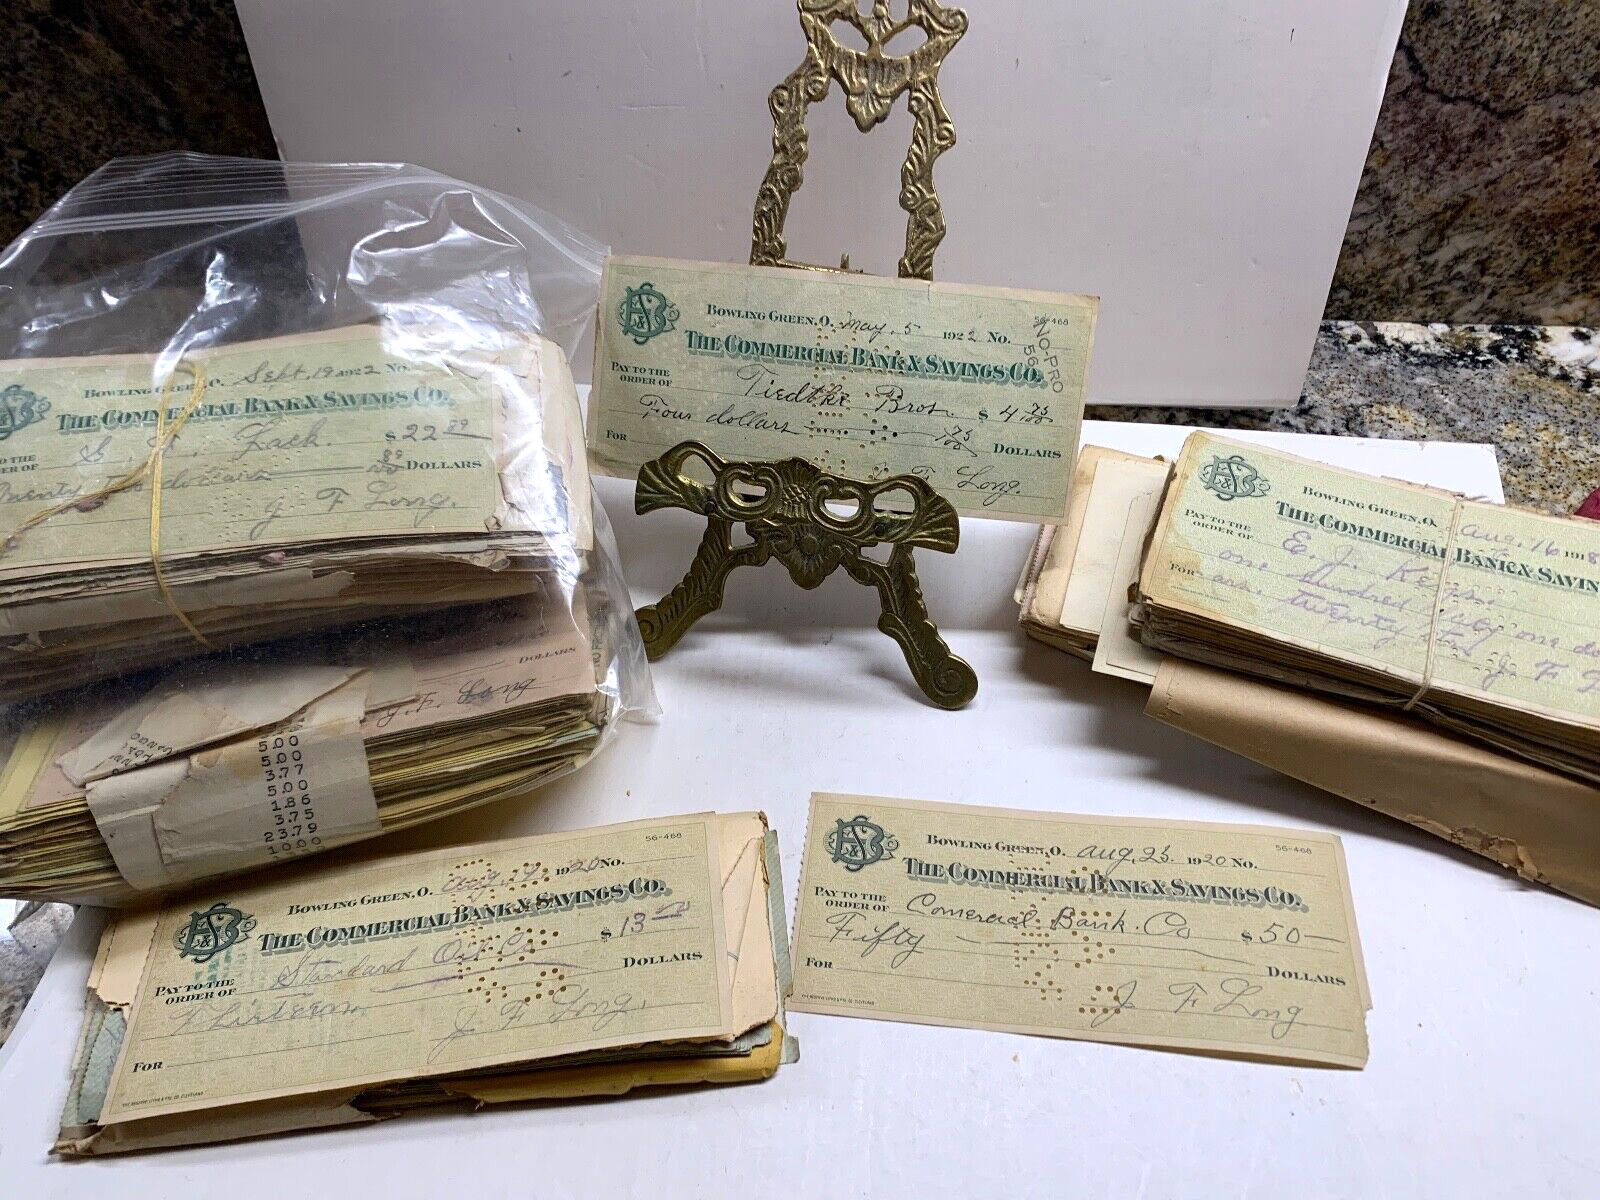 985 Antique Personal Checks 1900's 1920s 1930s VTG Documents Business Bank Notes